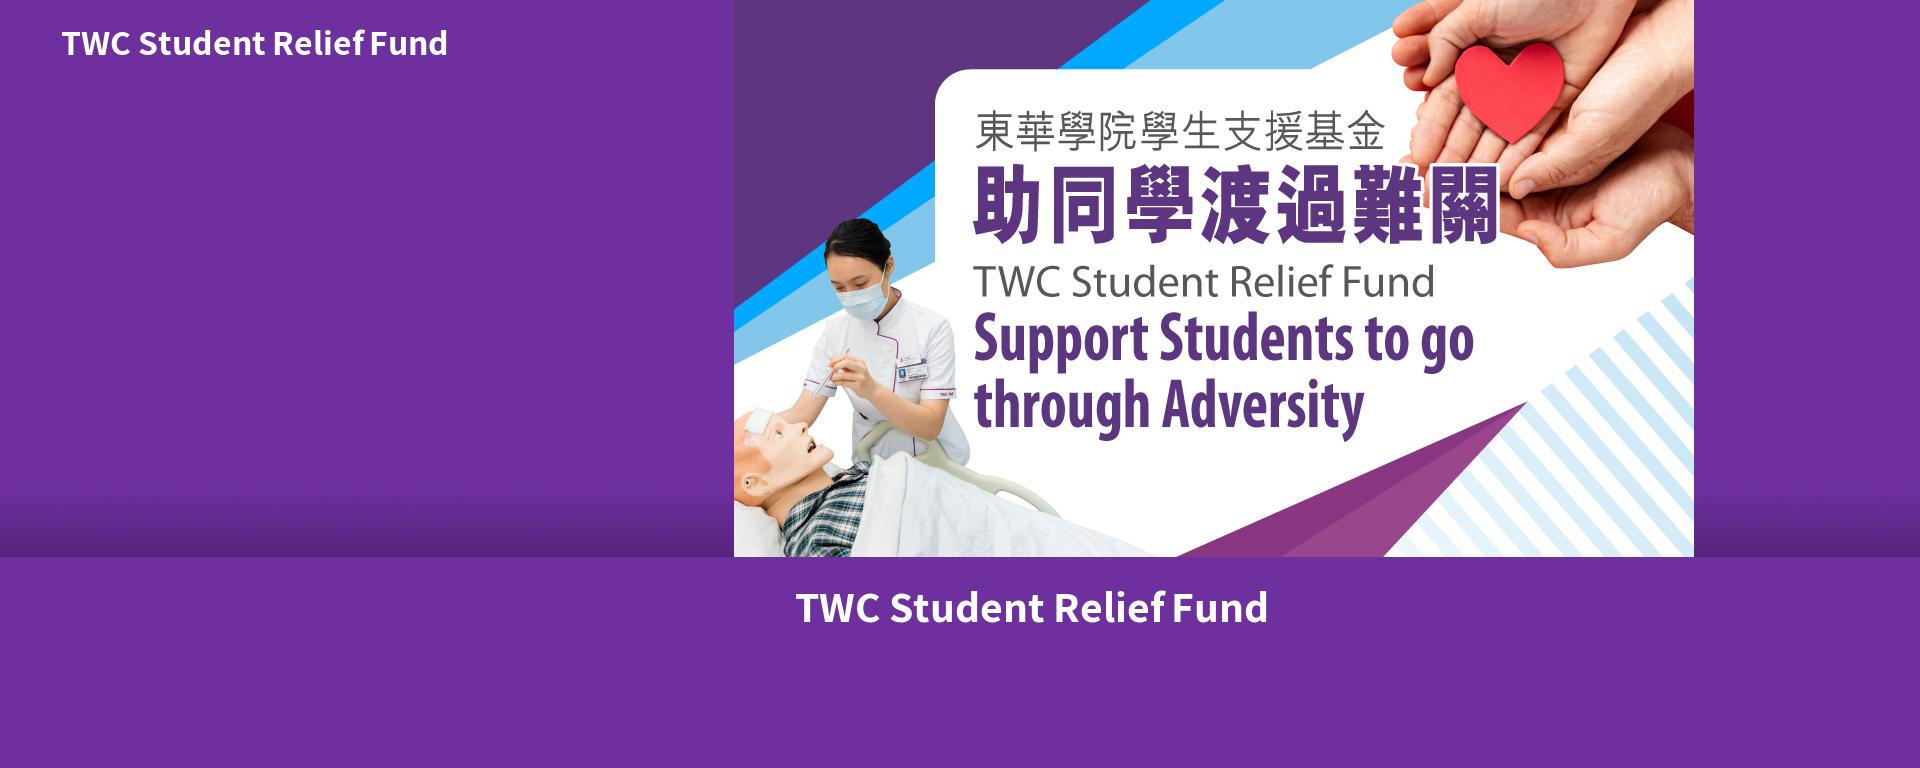 TWC Student Relief Fund